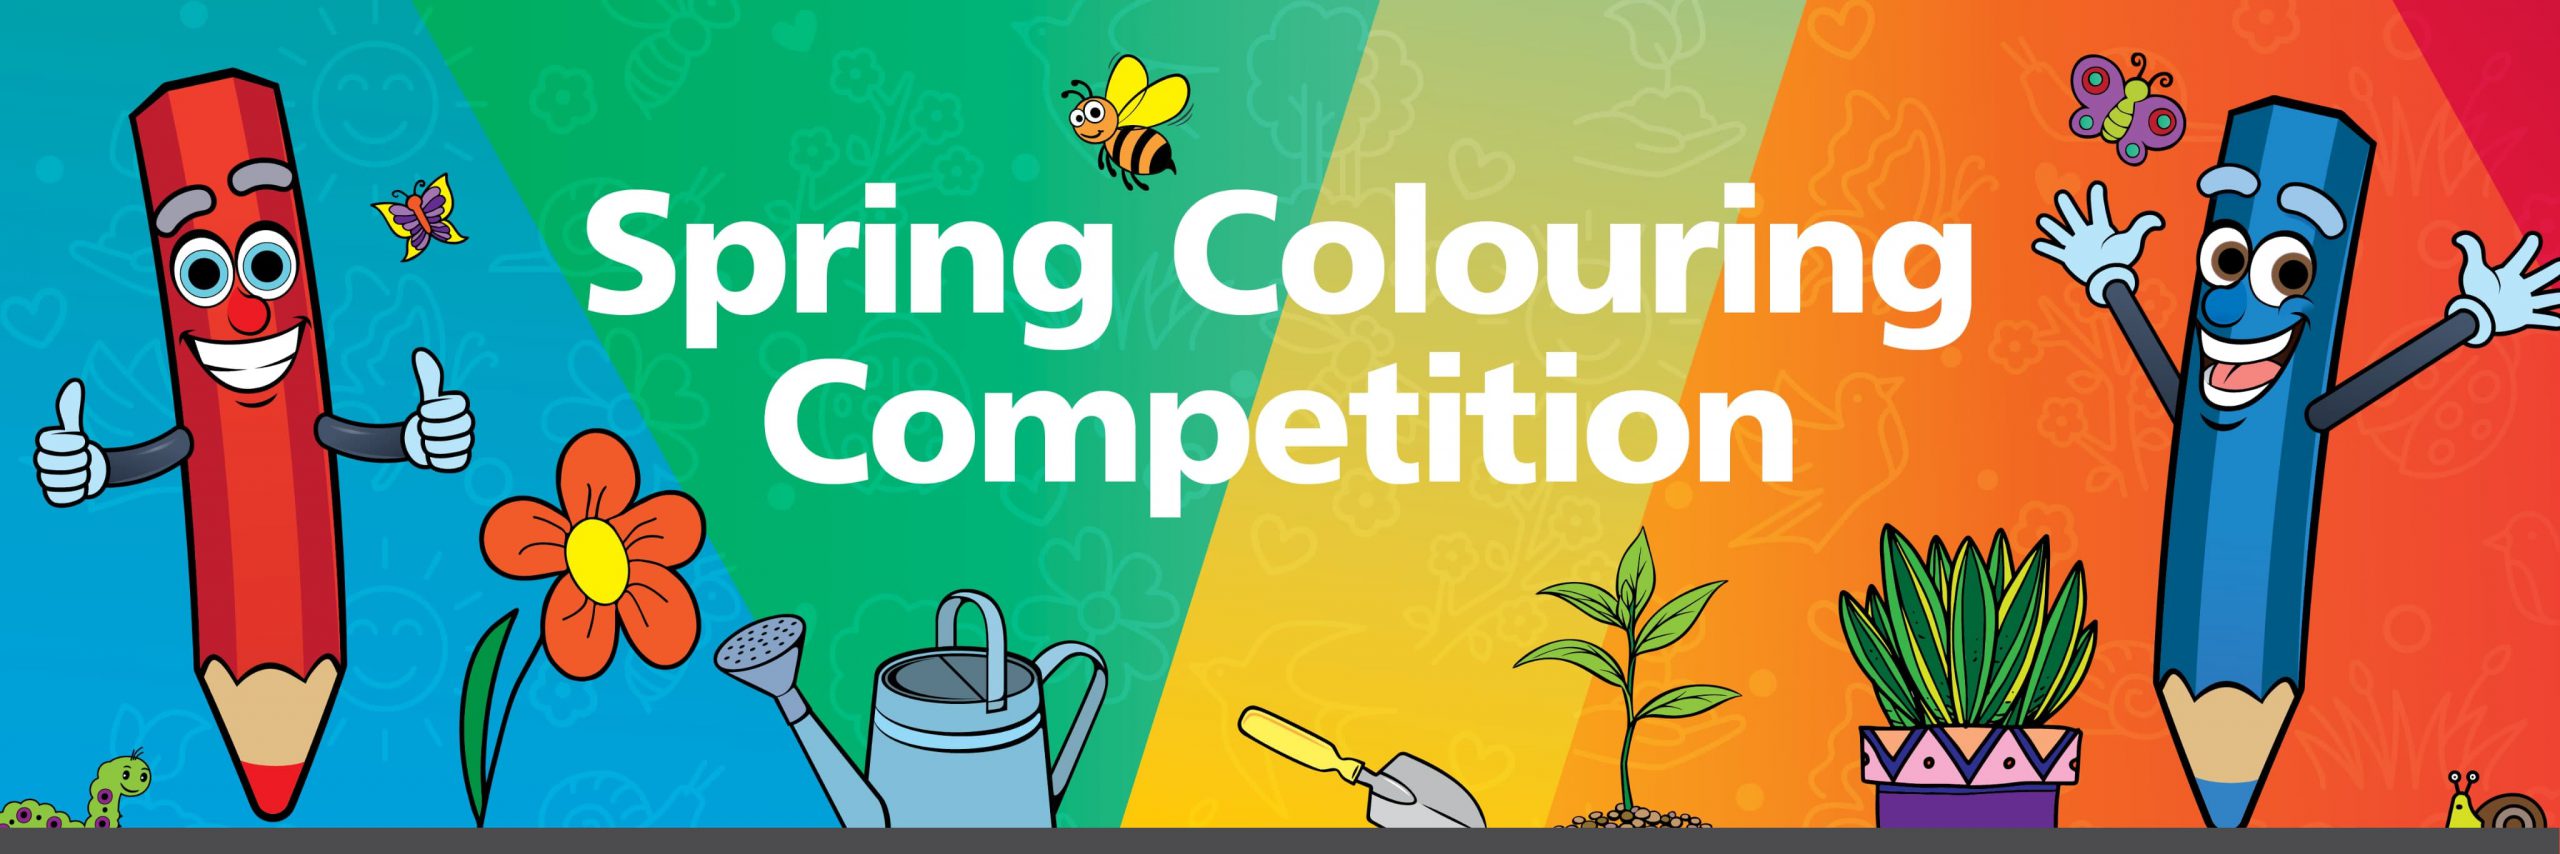 Spring Colouring Competition